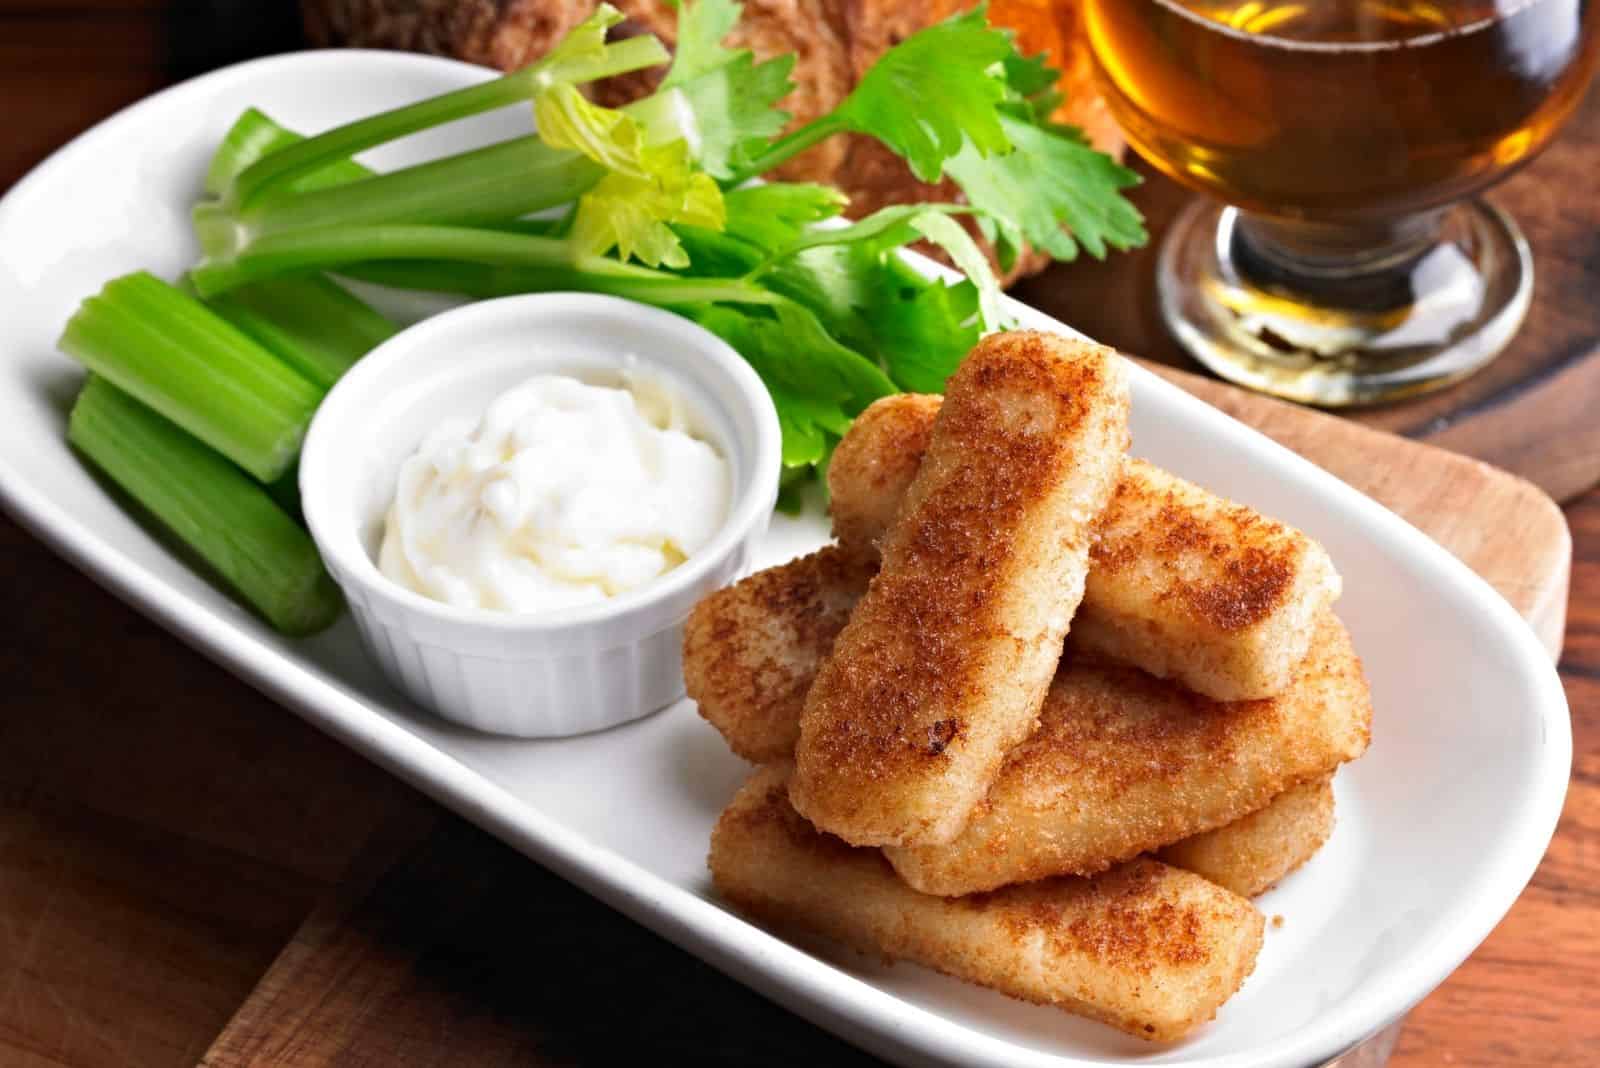 fish sticks with celery and mayo on plate with wine